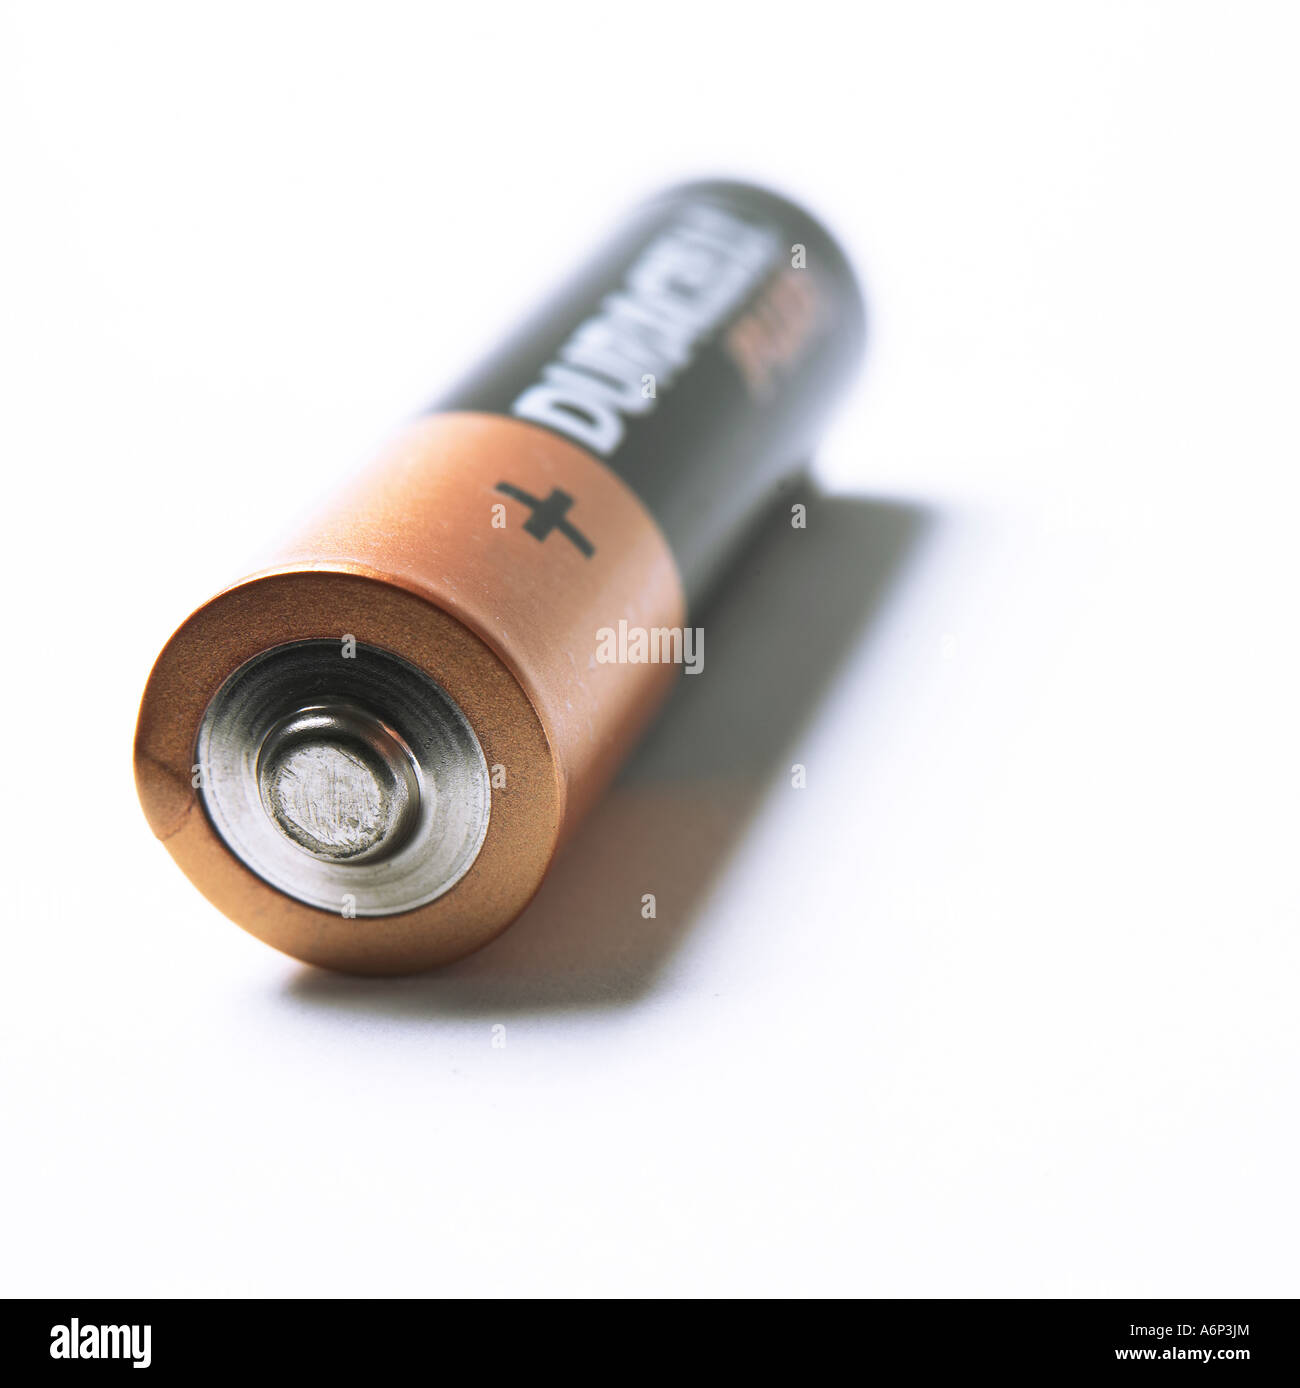 duracell battery with a short depth of field Stock Photo